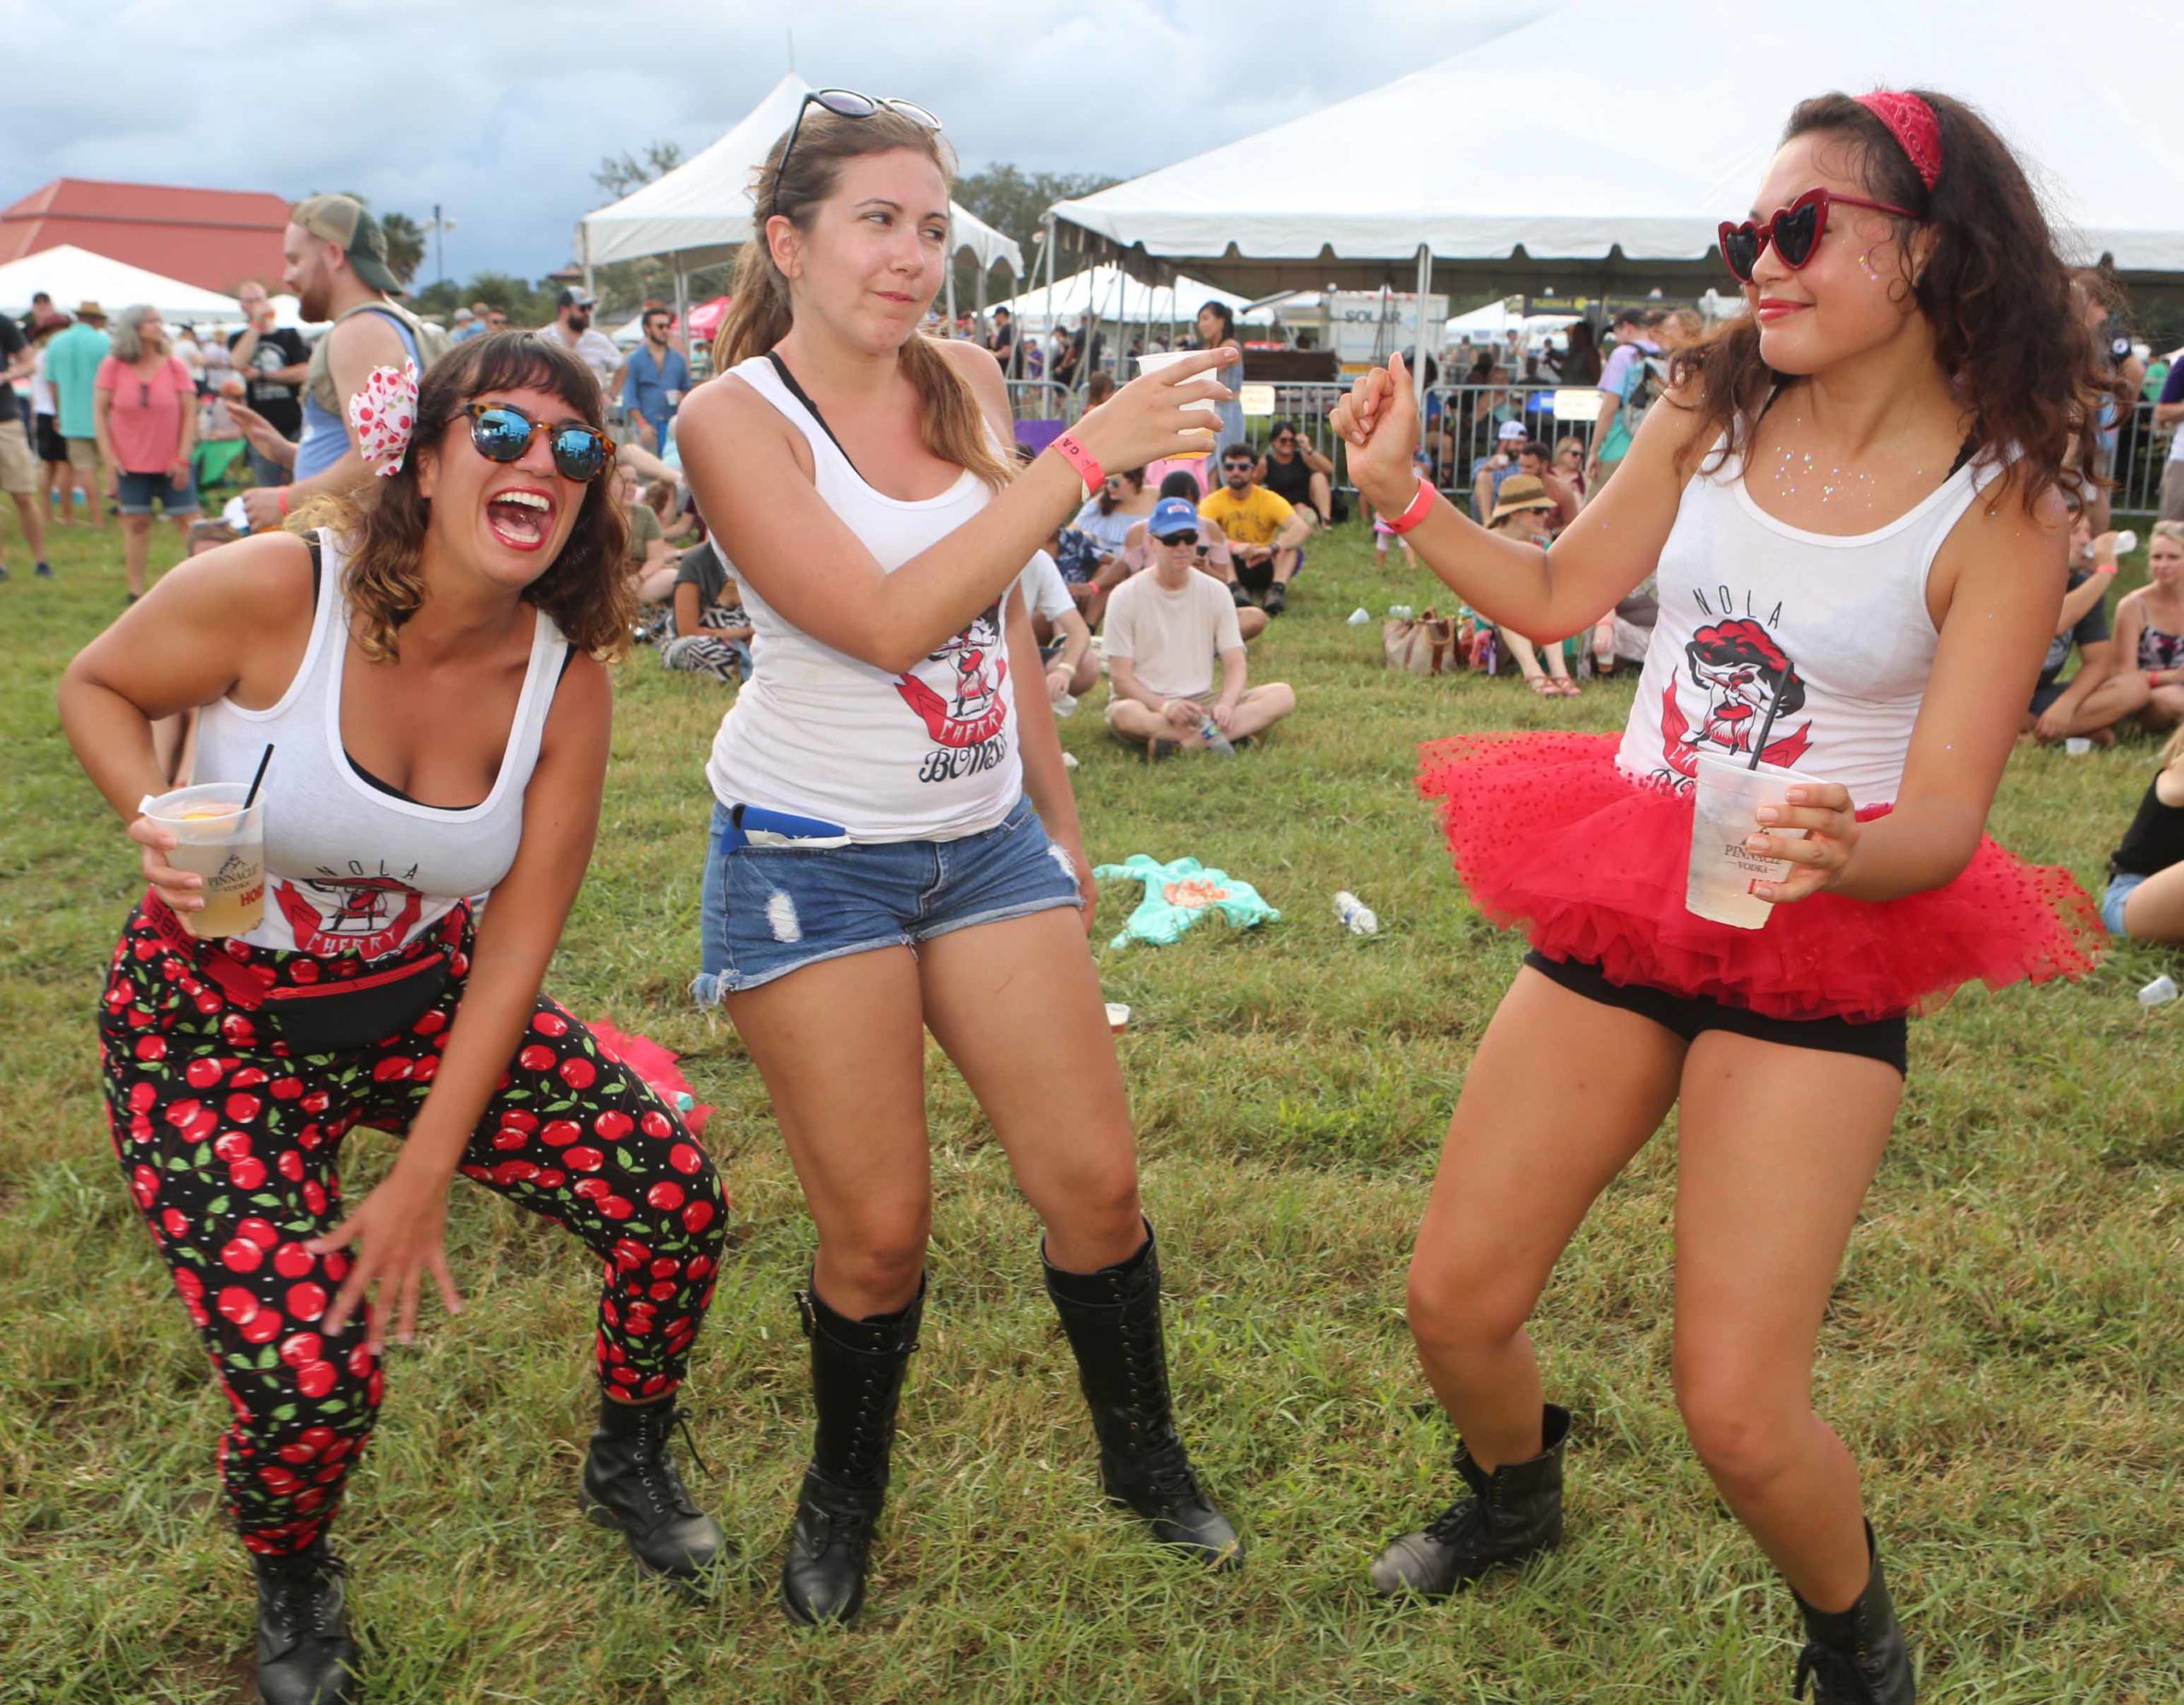 NOLA Cherry Bombs Liz DeVito, Marina McGarth and Athena Turek all dance to the sounds of the band Givers during the 9th Annual NOLA on Tap Beer Festival at City Park in New Orleans on Saturday, September 22, 2018.  (Photo by Peter G. Forest)  Instagram:  @forestphoto_llc